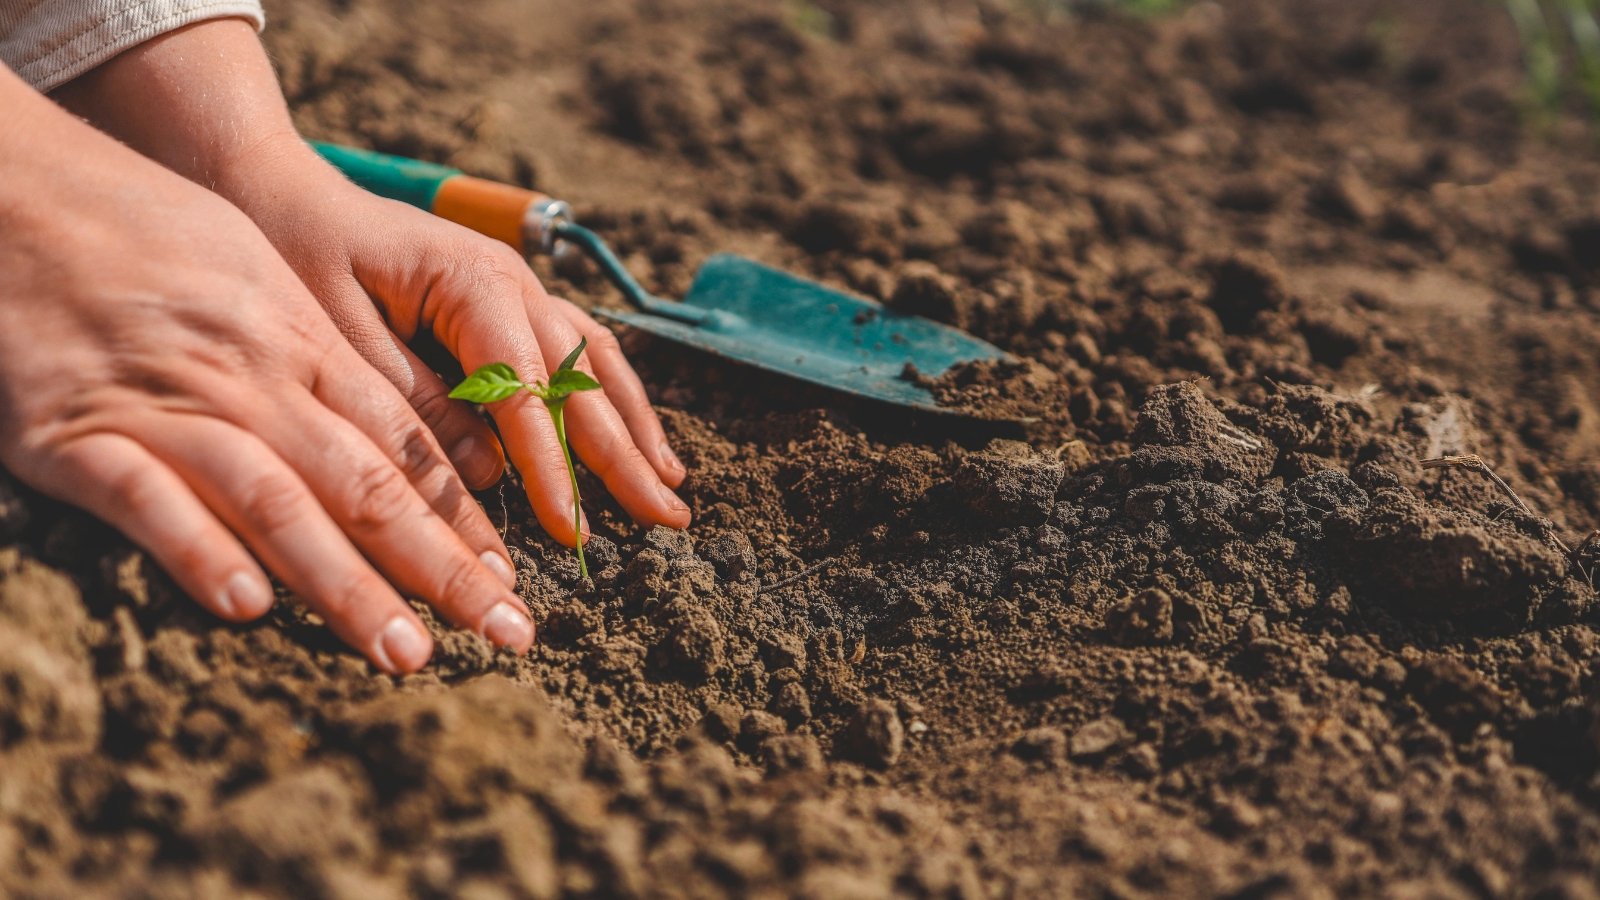 Close-up of female hands planting a young sapling consisting of a thin stem and a pair of oval green leaves with pointed tips among loose, moist soil in the garden.